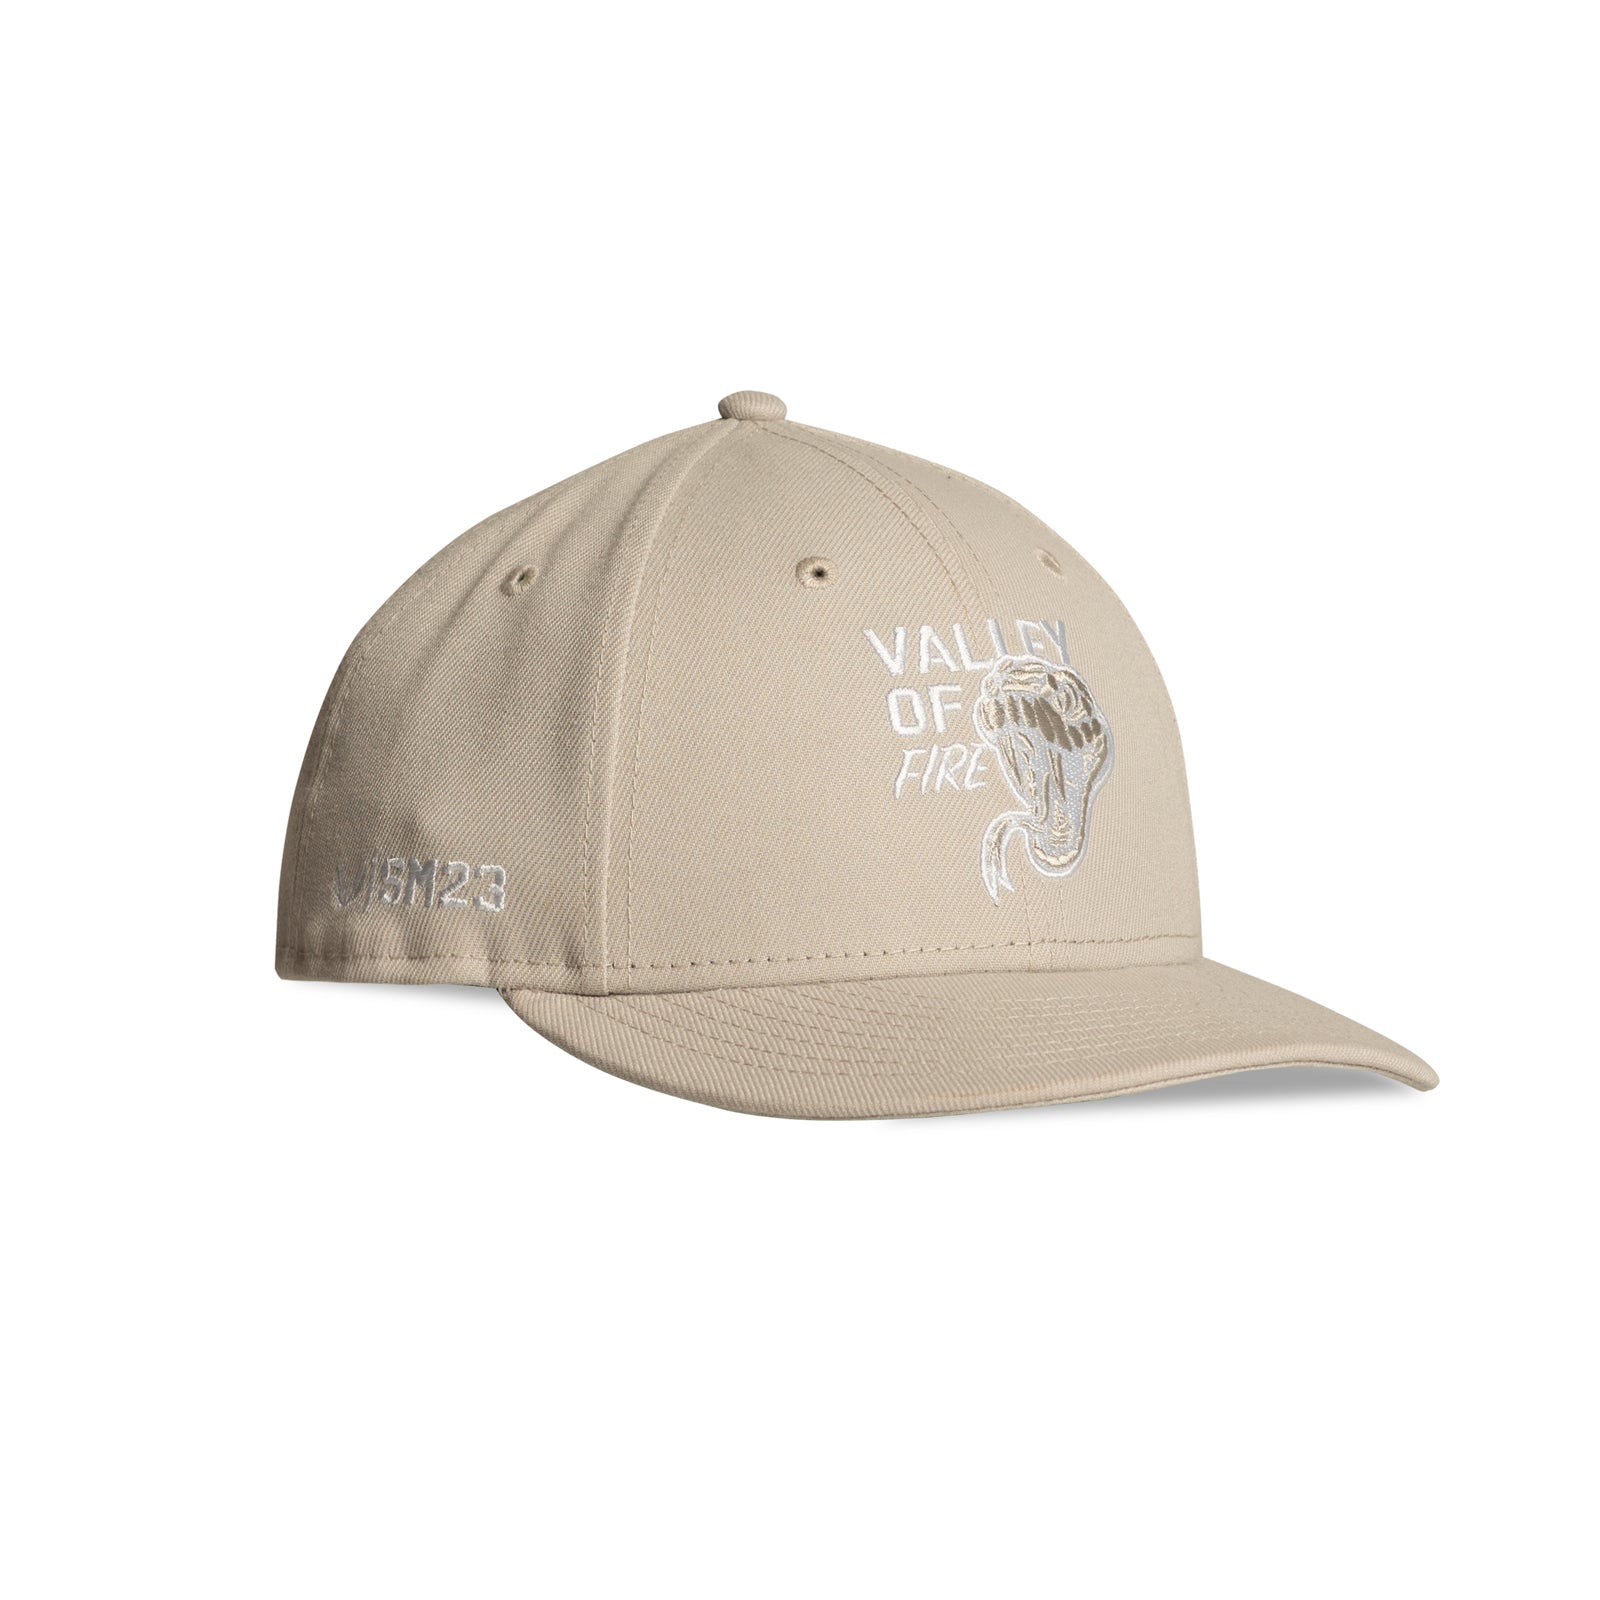 New Era LE 9Fifty Snap Hat - Beige/White “Valley of Fire” – ASRV